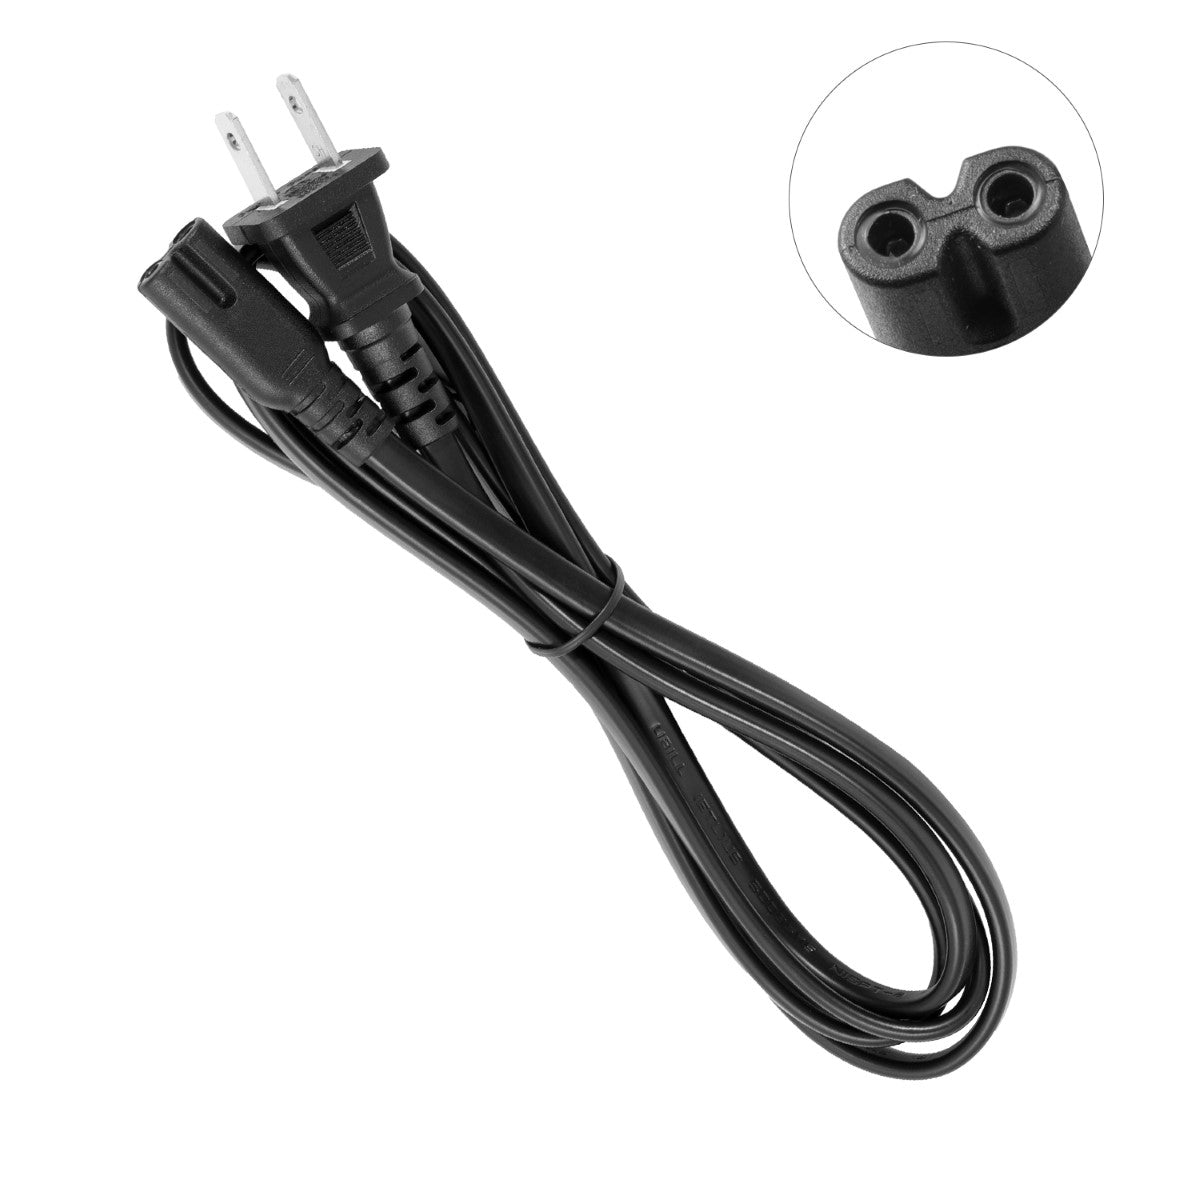 Power Cable for HP OfficeJet Pro 9015 All-in-One Wireless Printer.